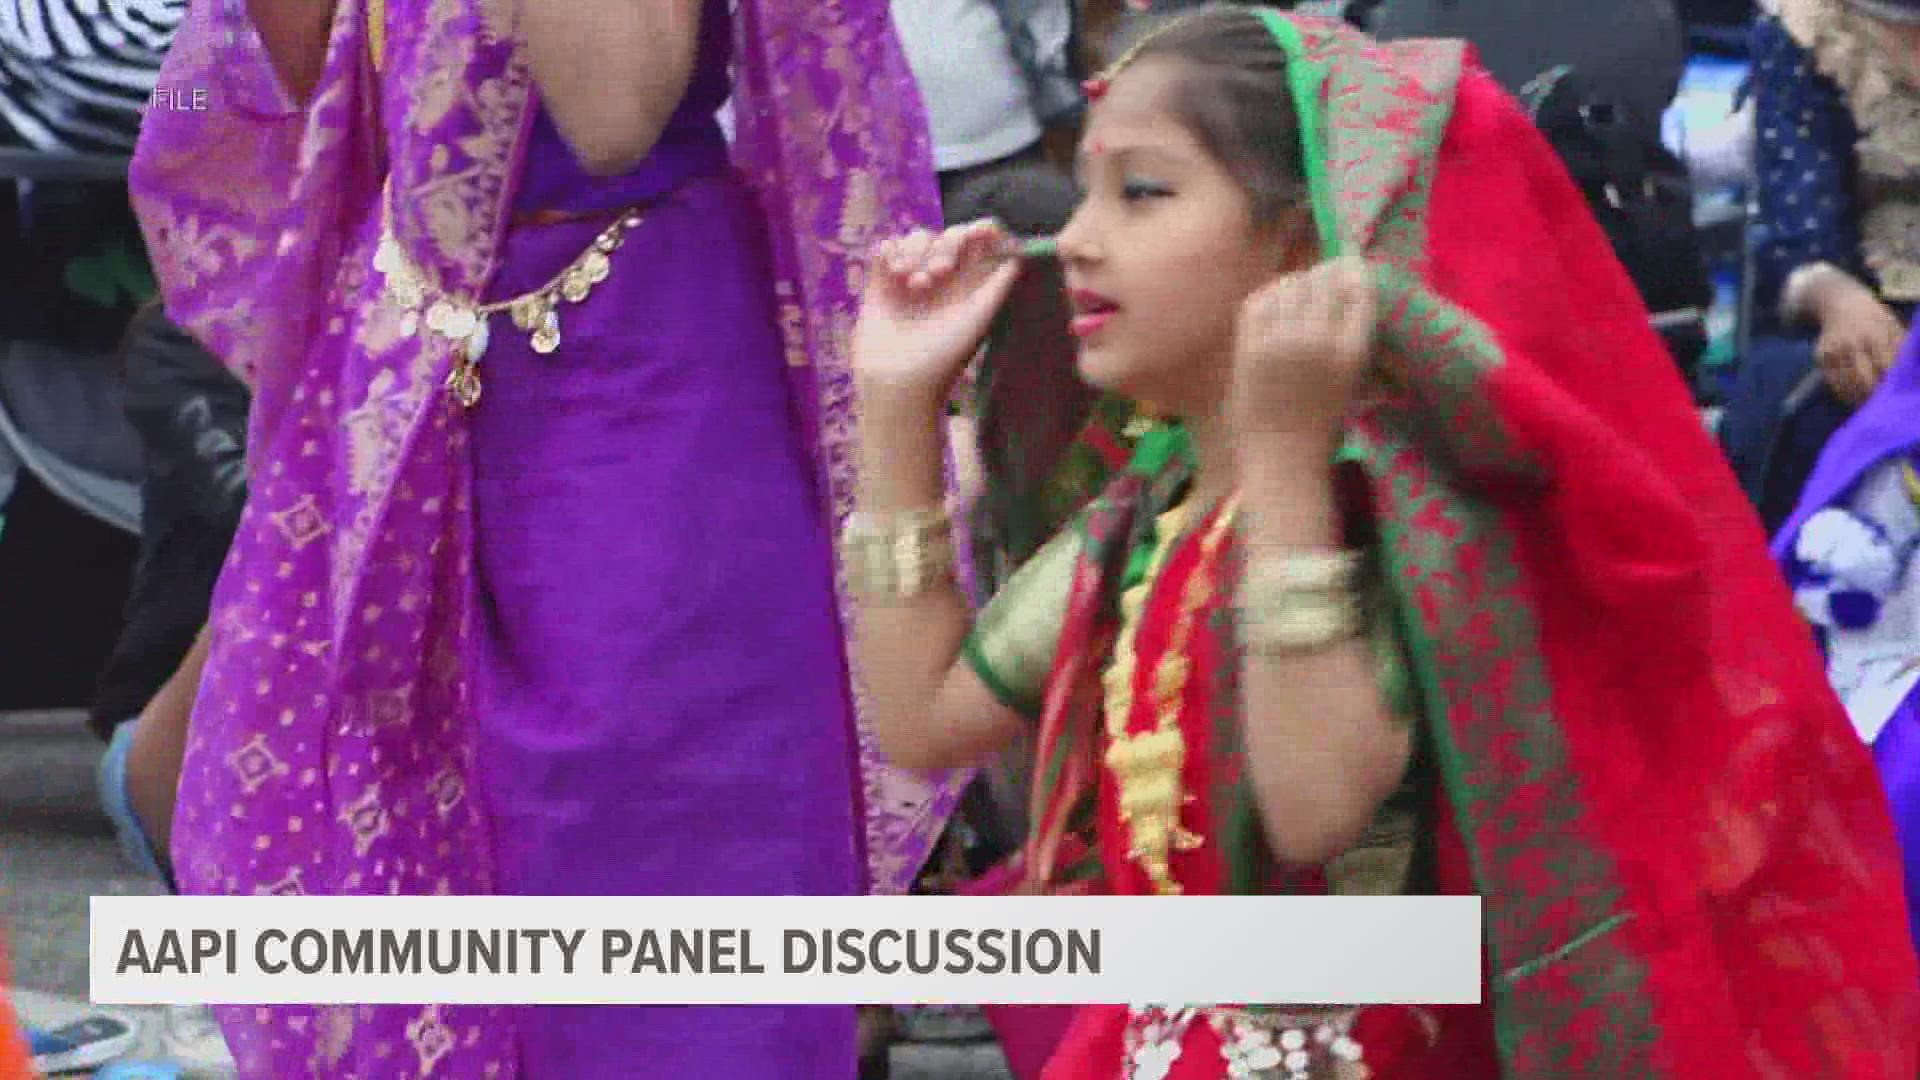 The intent of the panel discussion is to showcase their culture and history, but also to address ongoing issues.